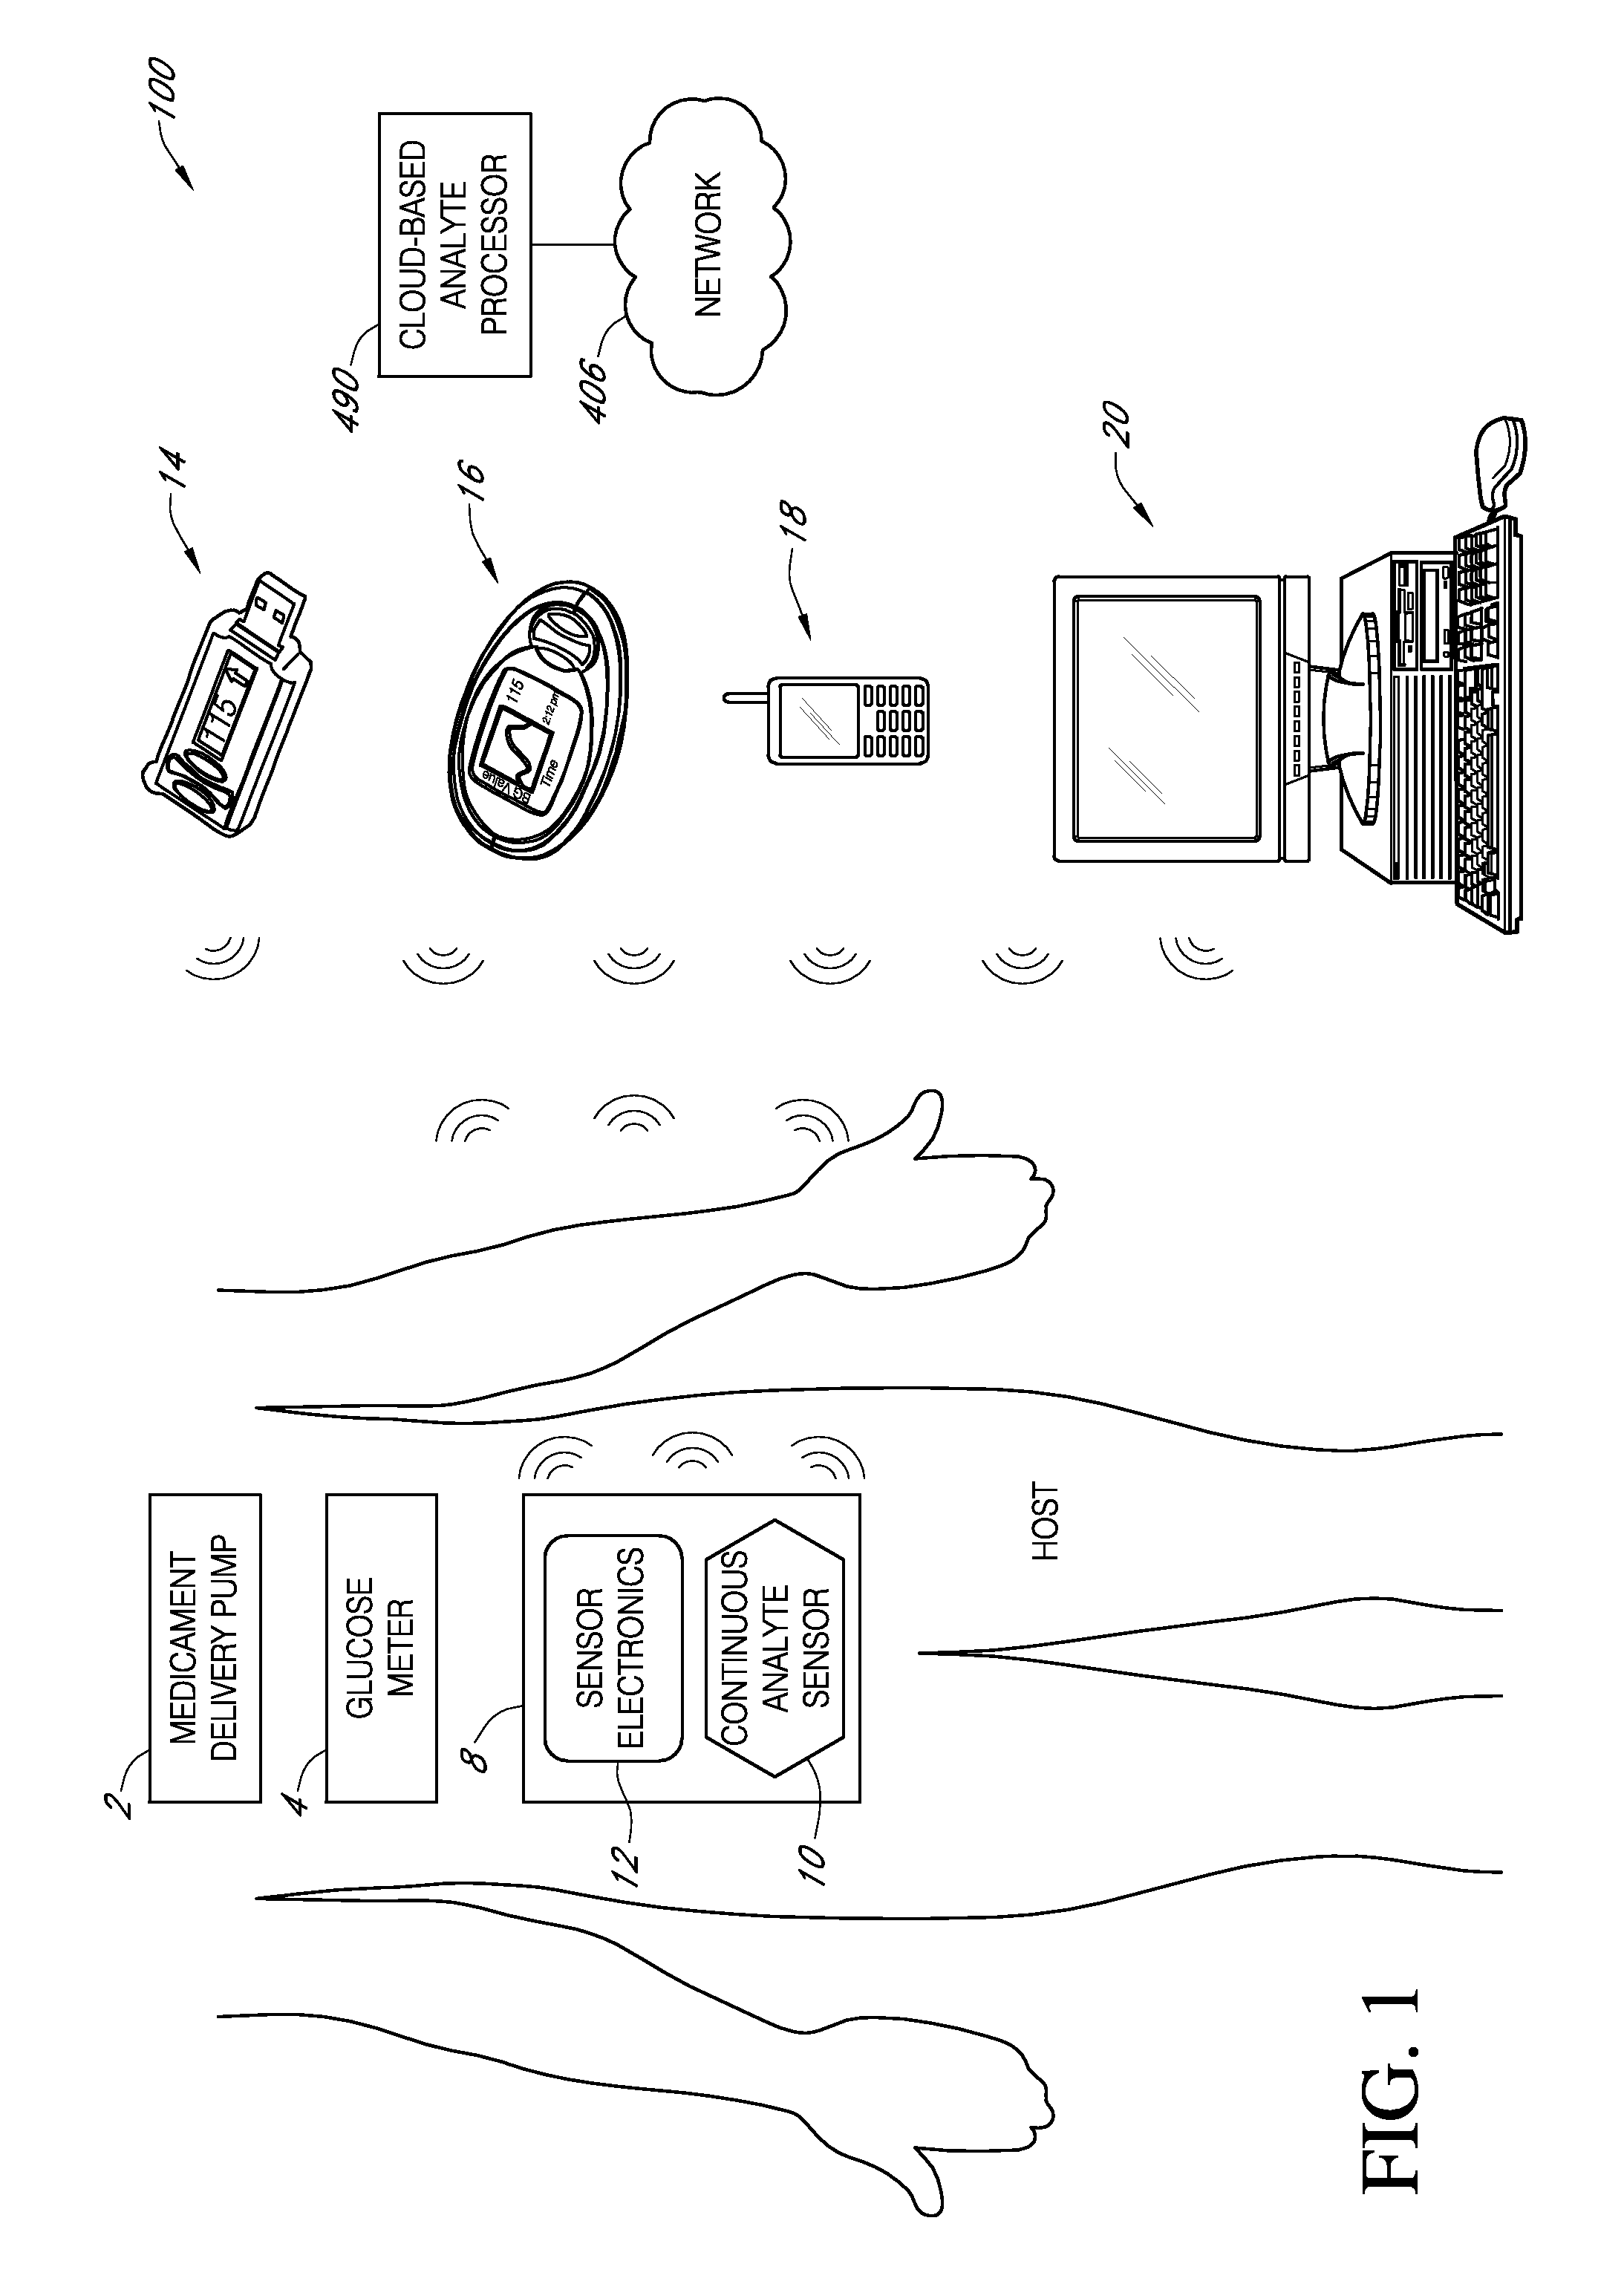 Systems and methods for dynamically and intelligently monitoring a host's glycemic condition after an alert is triggered